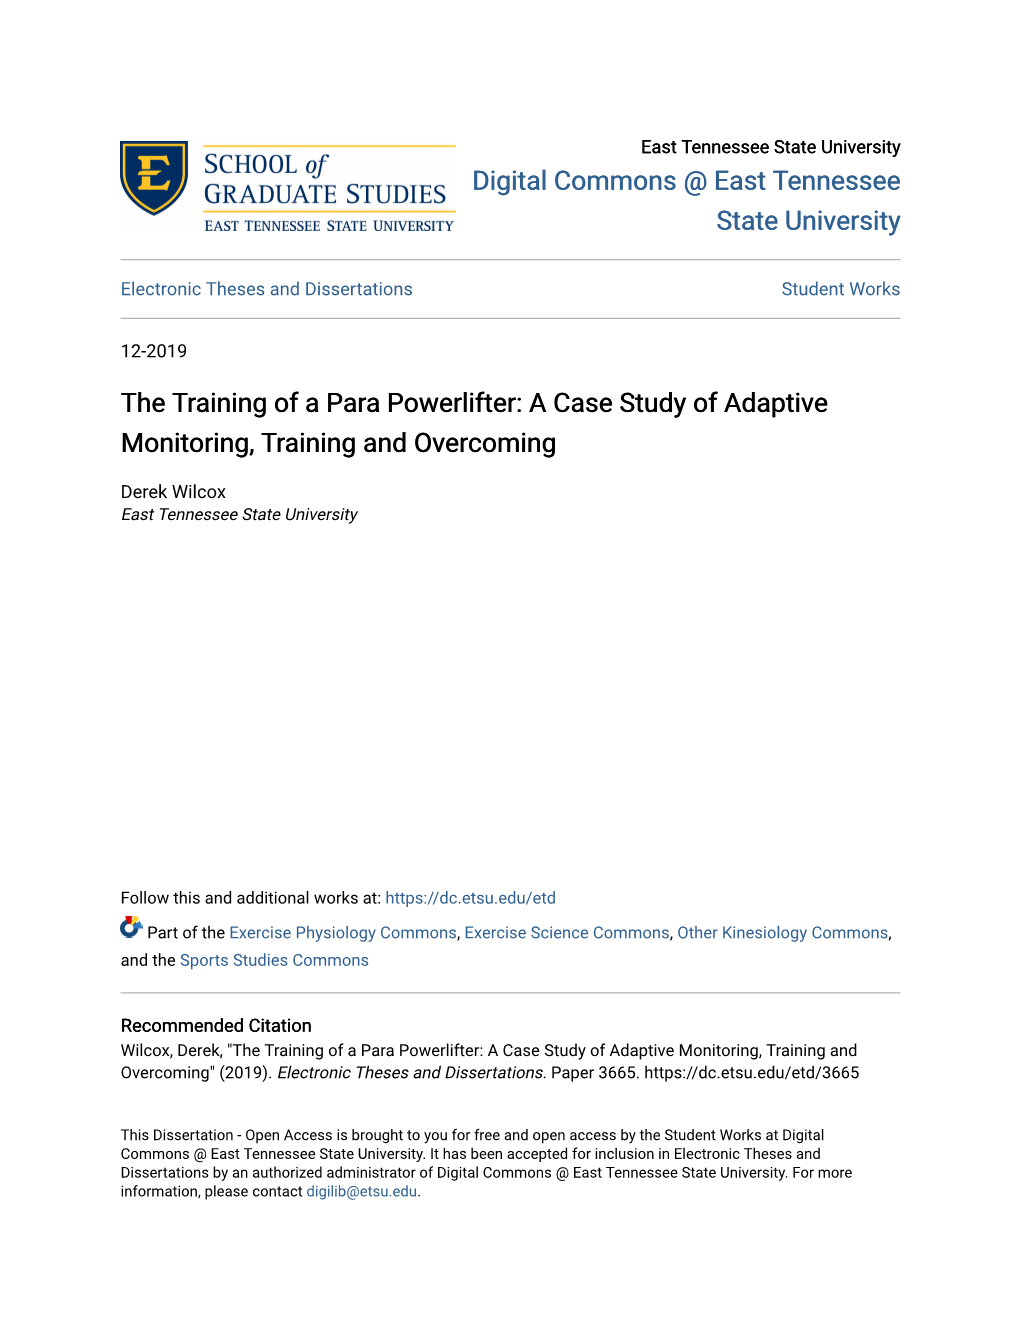 The Training of a Para Powerlifter: a Case Study of Adaptive Monitoring, Training and Overcoming